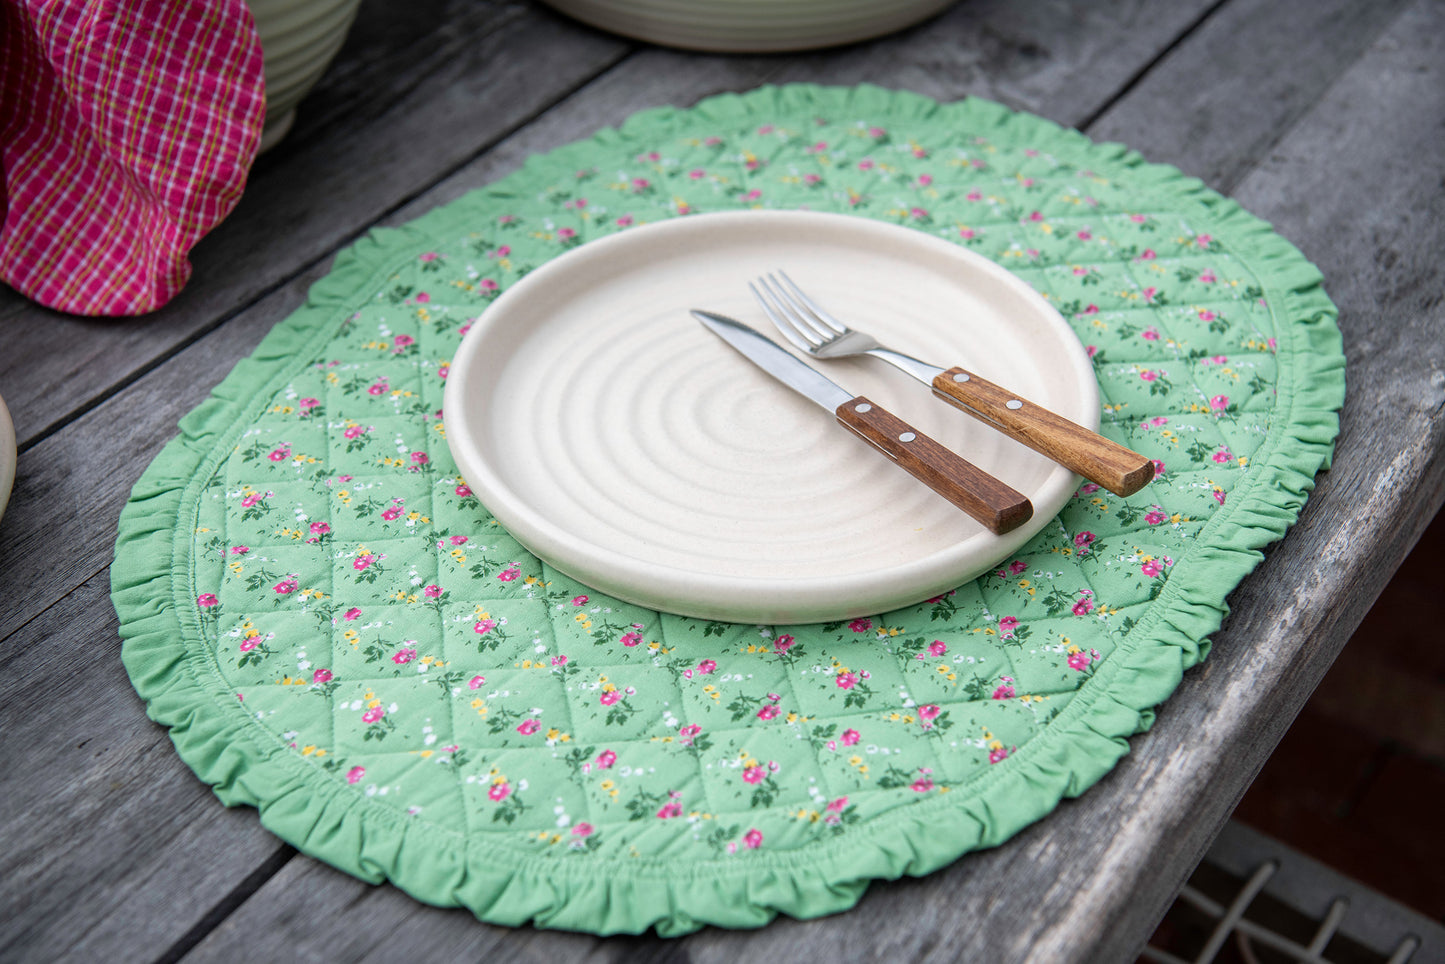 Felicity Fleur Ruffled Placemats, Set of 2